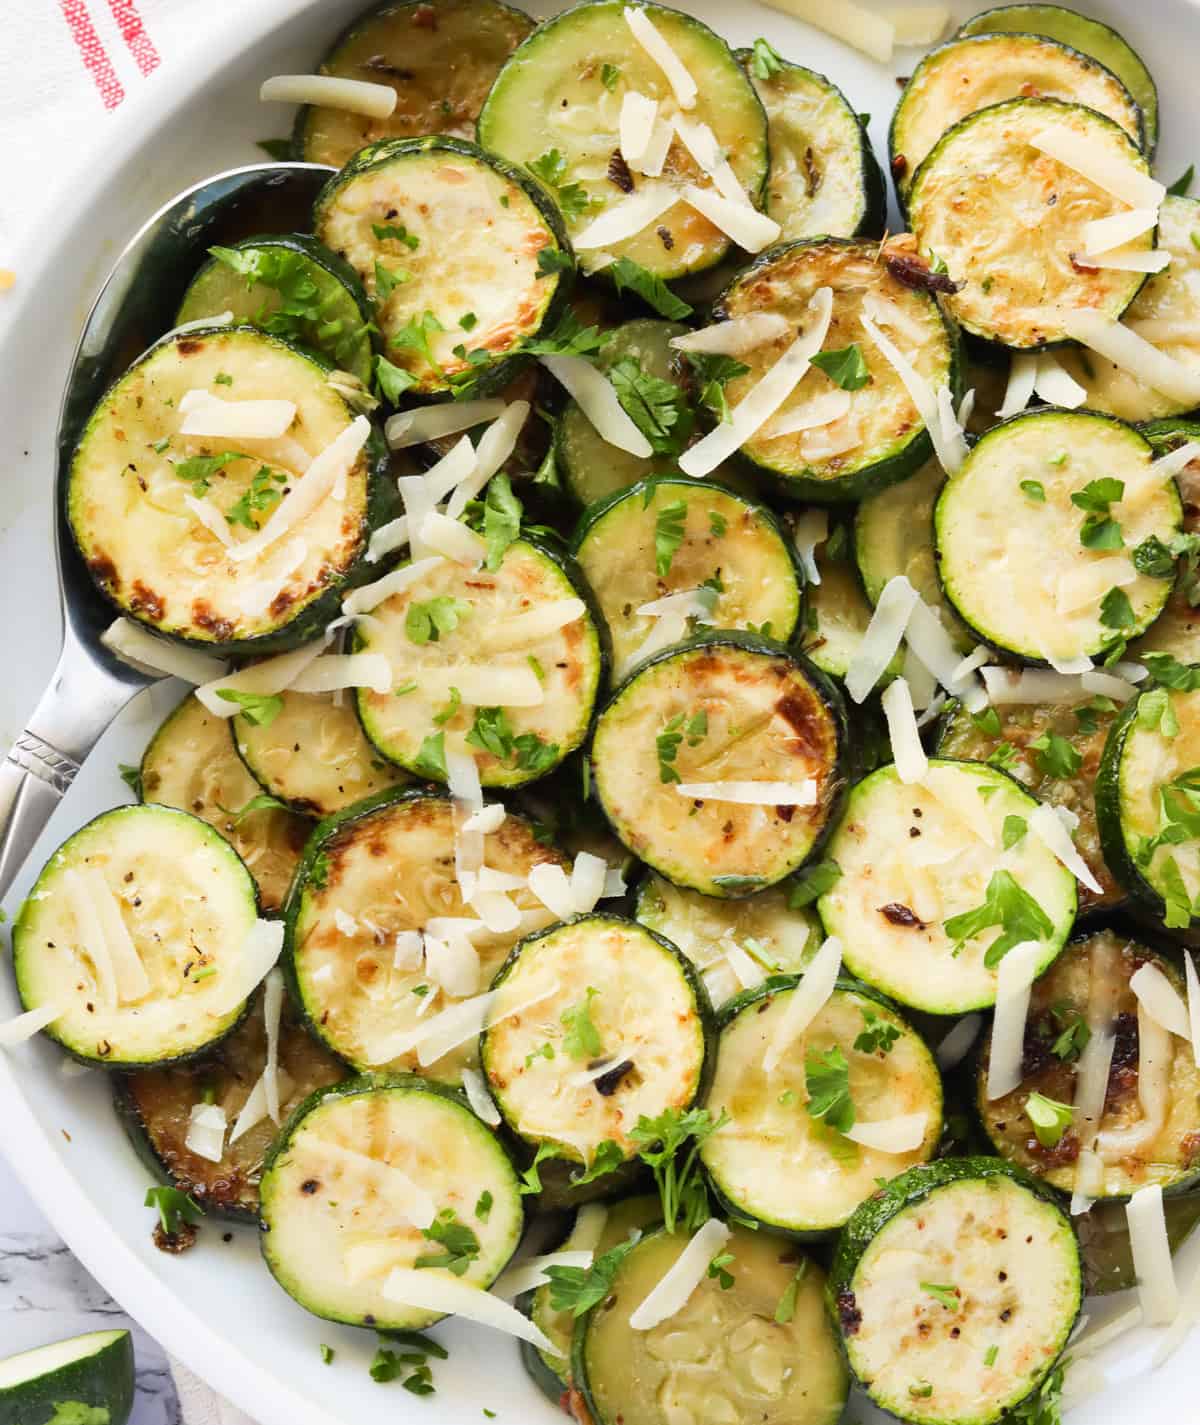 Zucchinis with parmesan